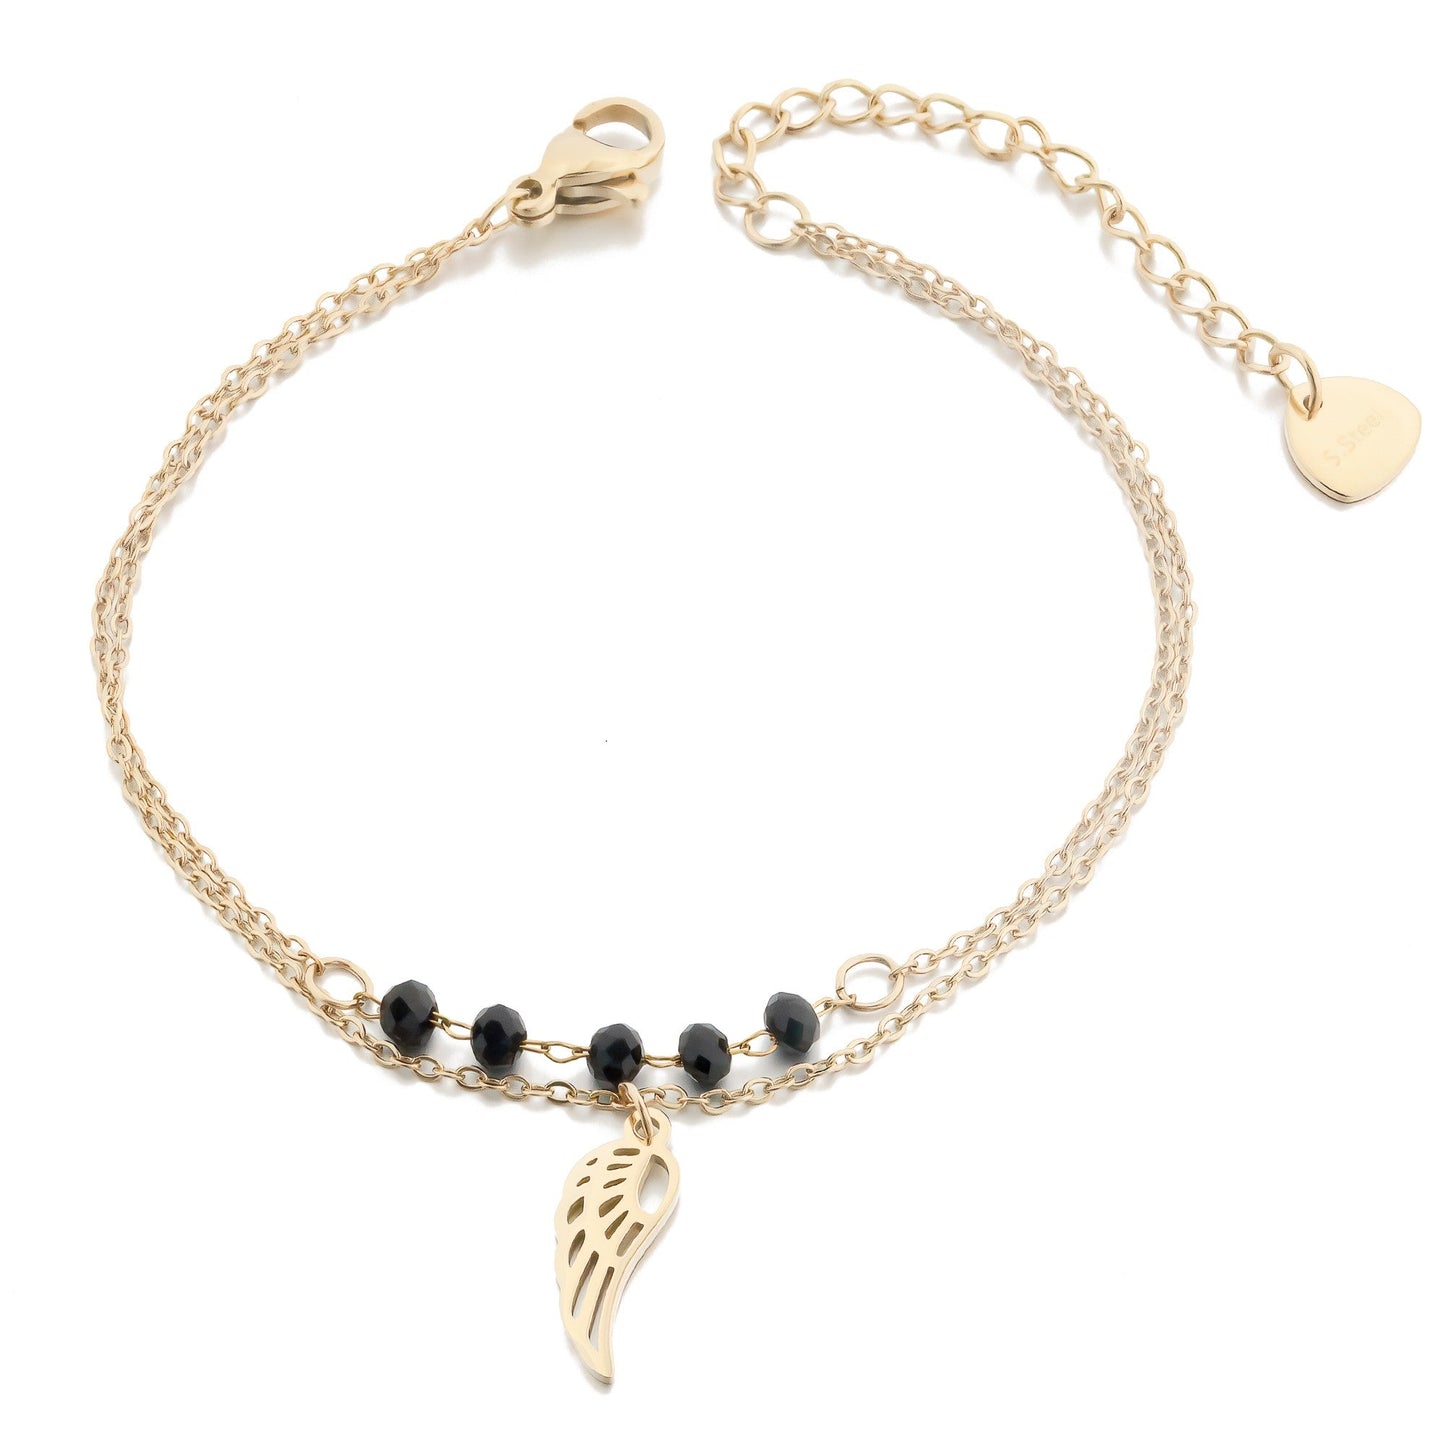 Double Chain Angel Wing Bracelet with Black Crystals